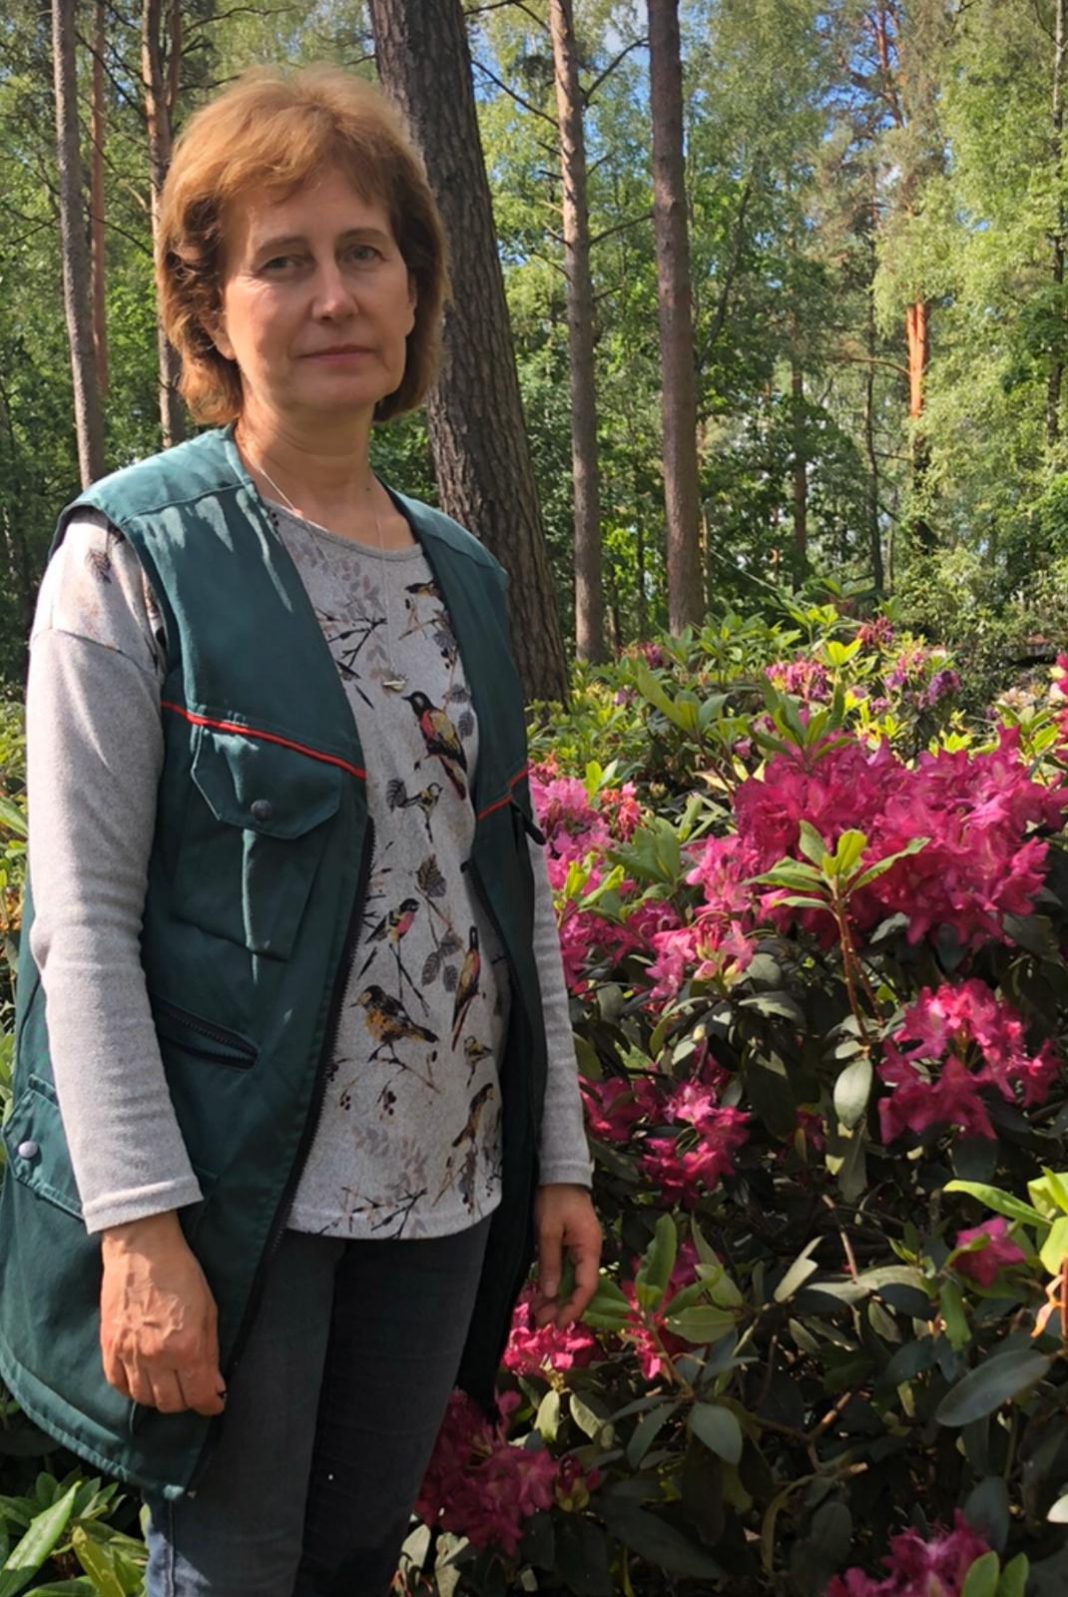 "MIUANIZ" and "Dimash Kudaibergen": new varieties of rhododendron in honor of Dimash and his grandmother appeared in Latvia